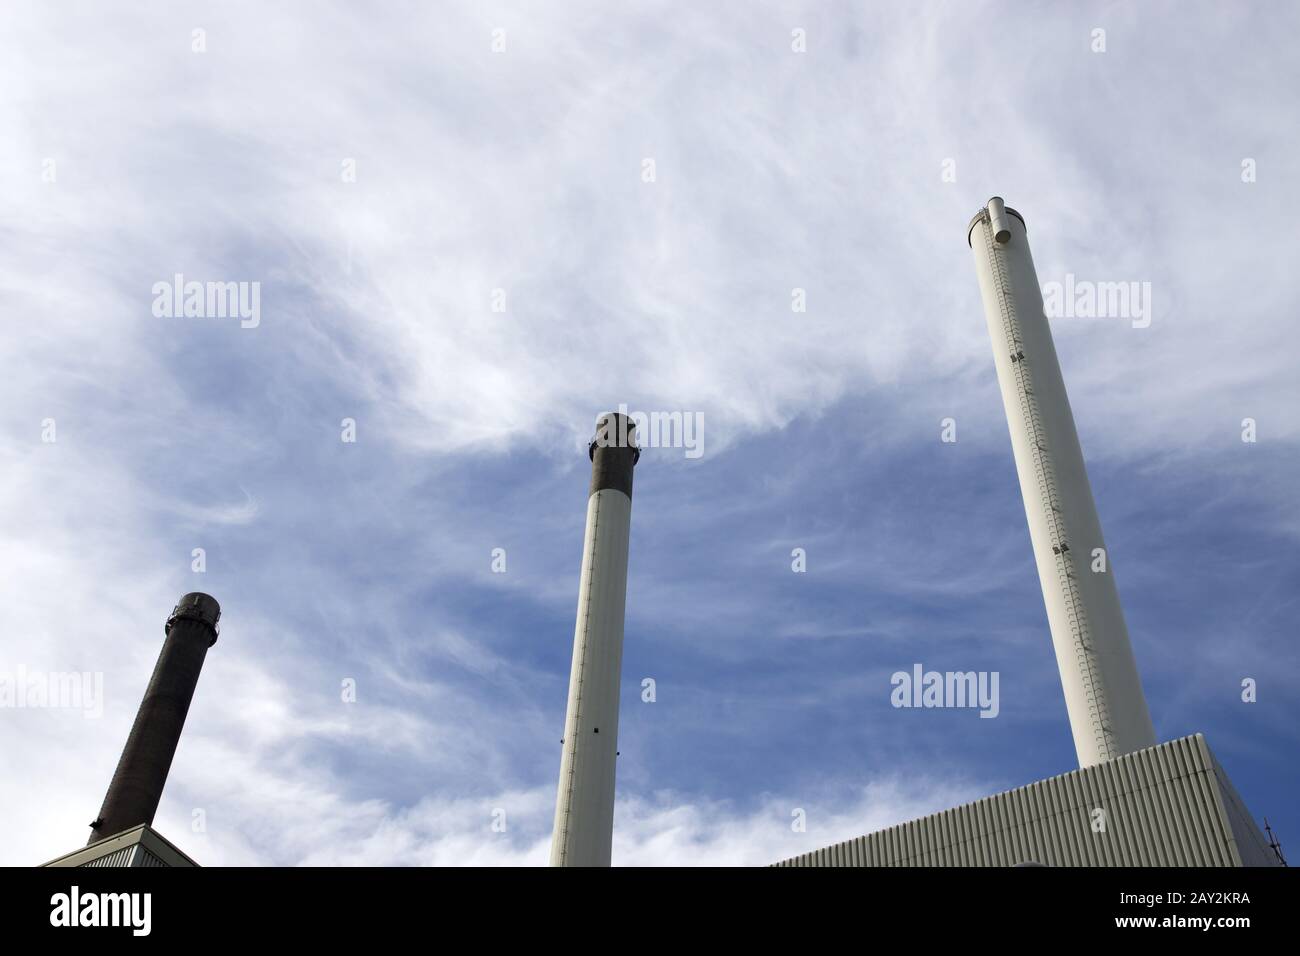 Old power station in Datteln, NRW, Germany, 2014 Stock Photo